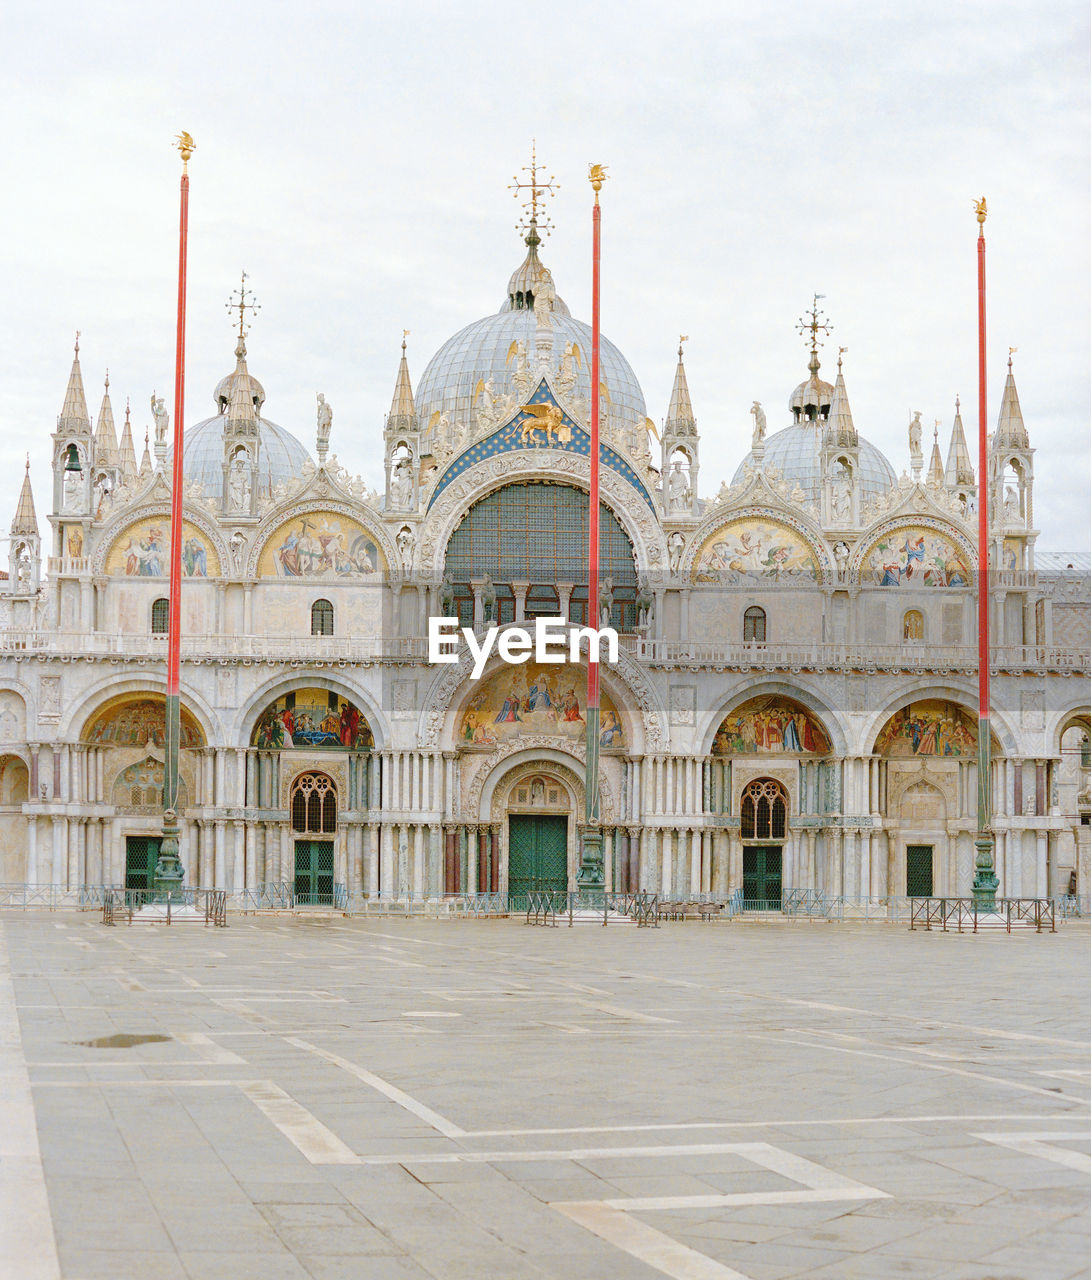 Piazza san marco empty during covid19 travel restrictions 